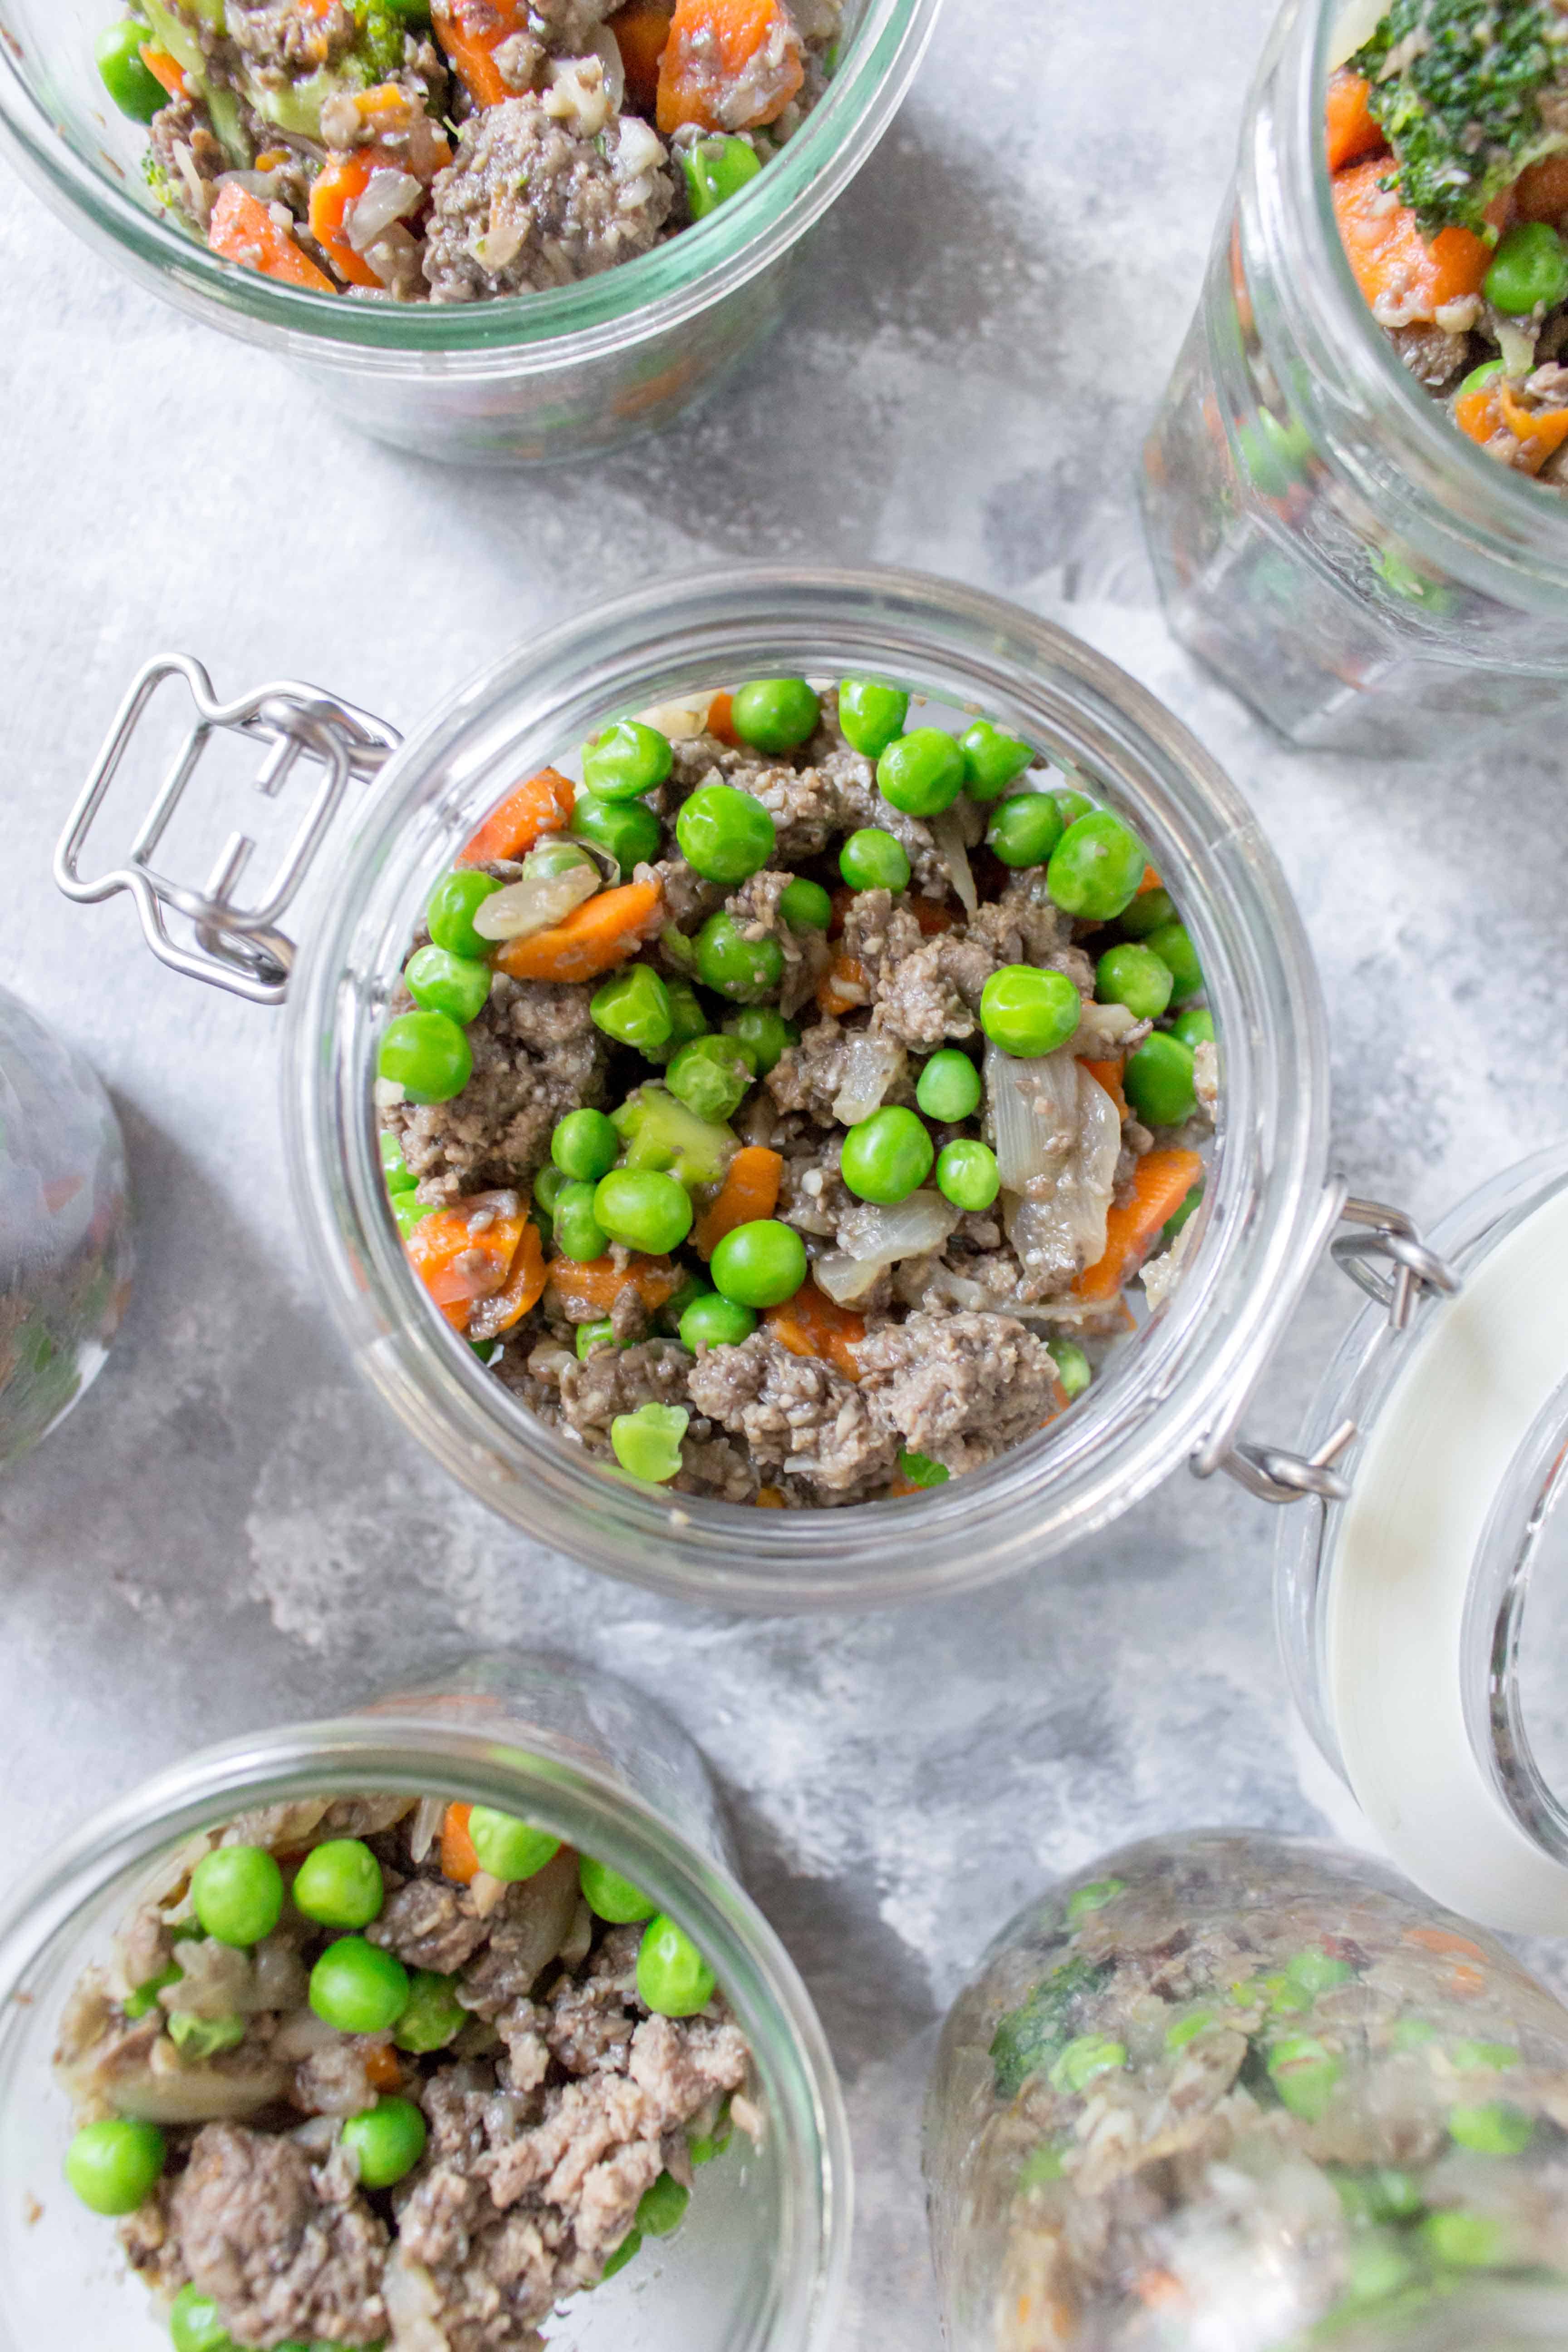 Craving some comfort food but don't want to feel weighed down? This Mason Jar Shepherd's Pie Meal Prep is packed with veggies and is the perfect grab and go lunch!